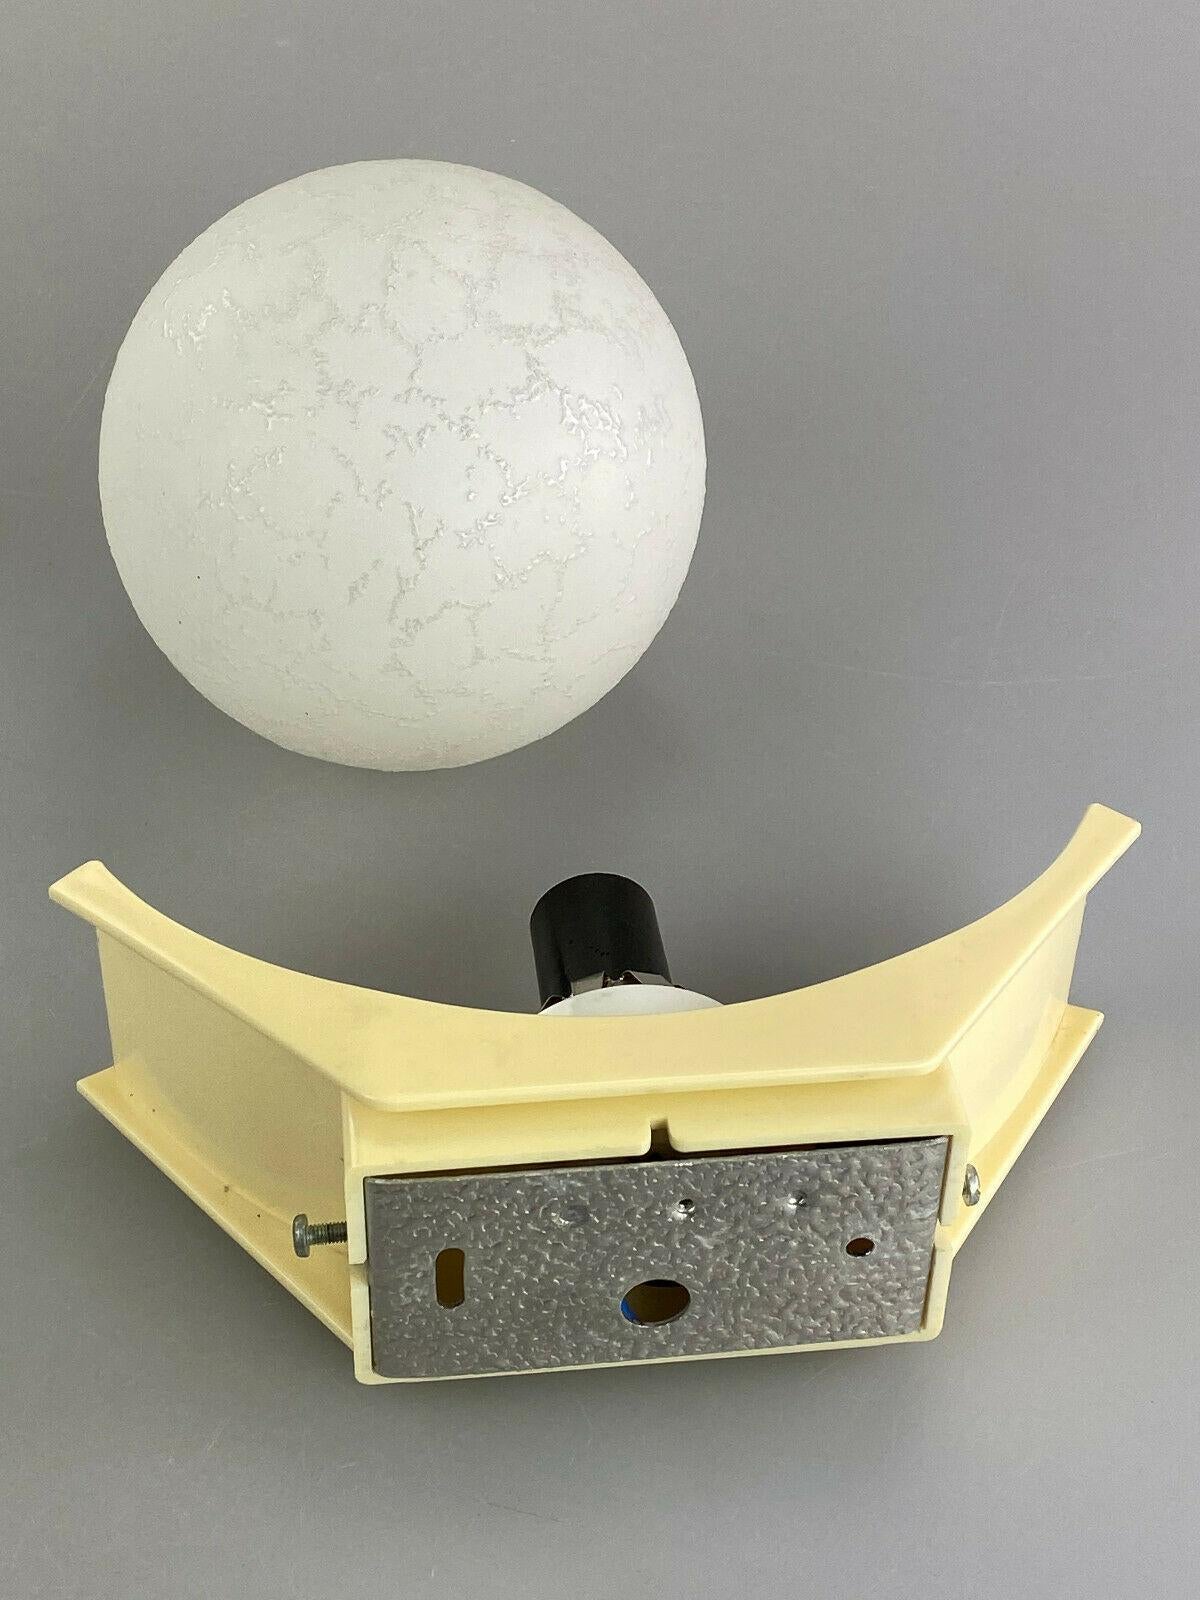 60s 70s Wall Lamp Ball Lamp Lamp Light Space Age Design For Sale 4